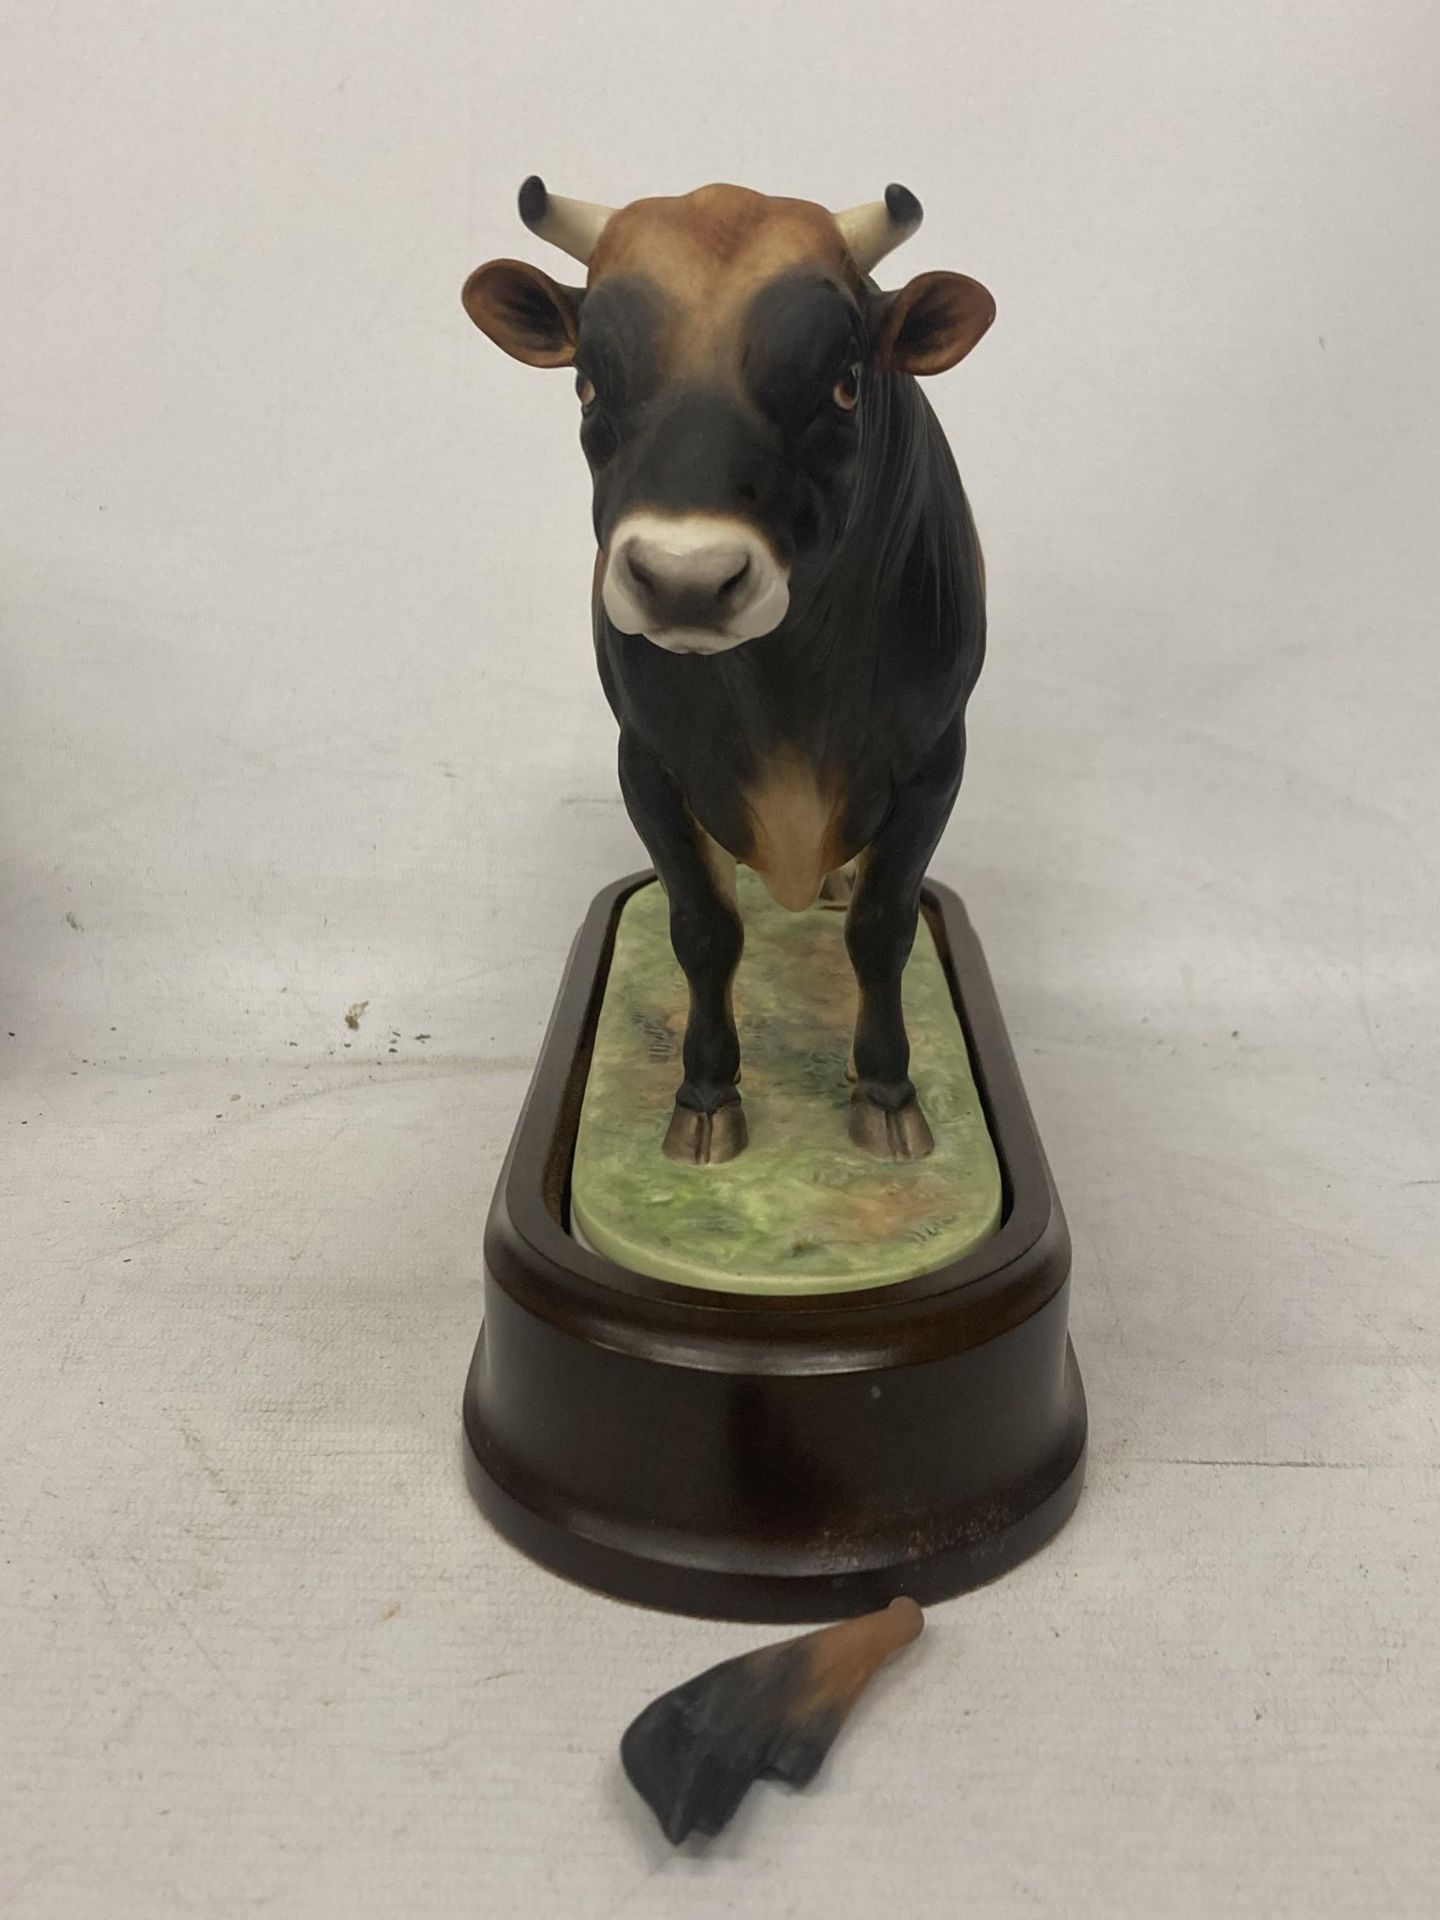 A ROYAL WORCESTER MODEL OF A JERSEY BULL MODELLED BY DORIS LINDNER PRODUCED IN A LIMITED EDITION - Image 2 of 5